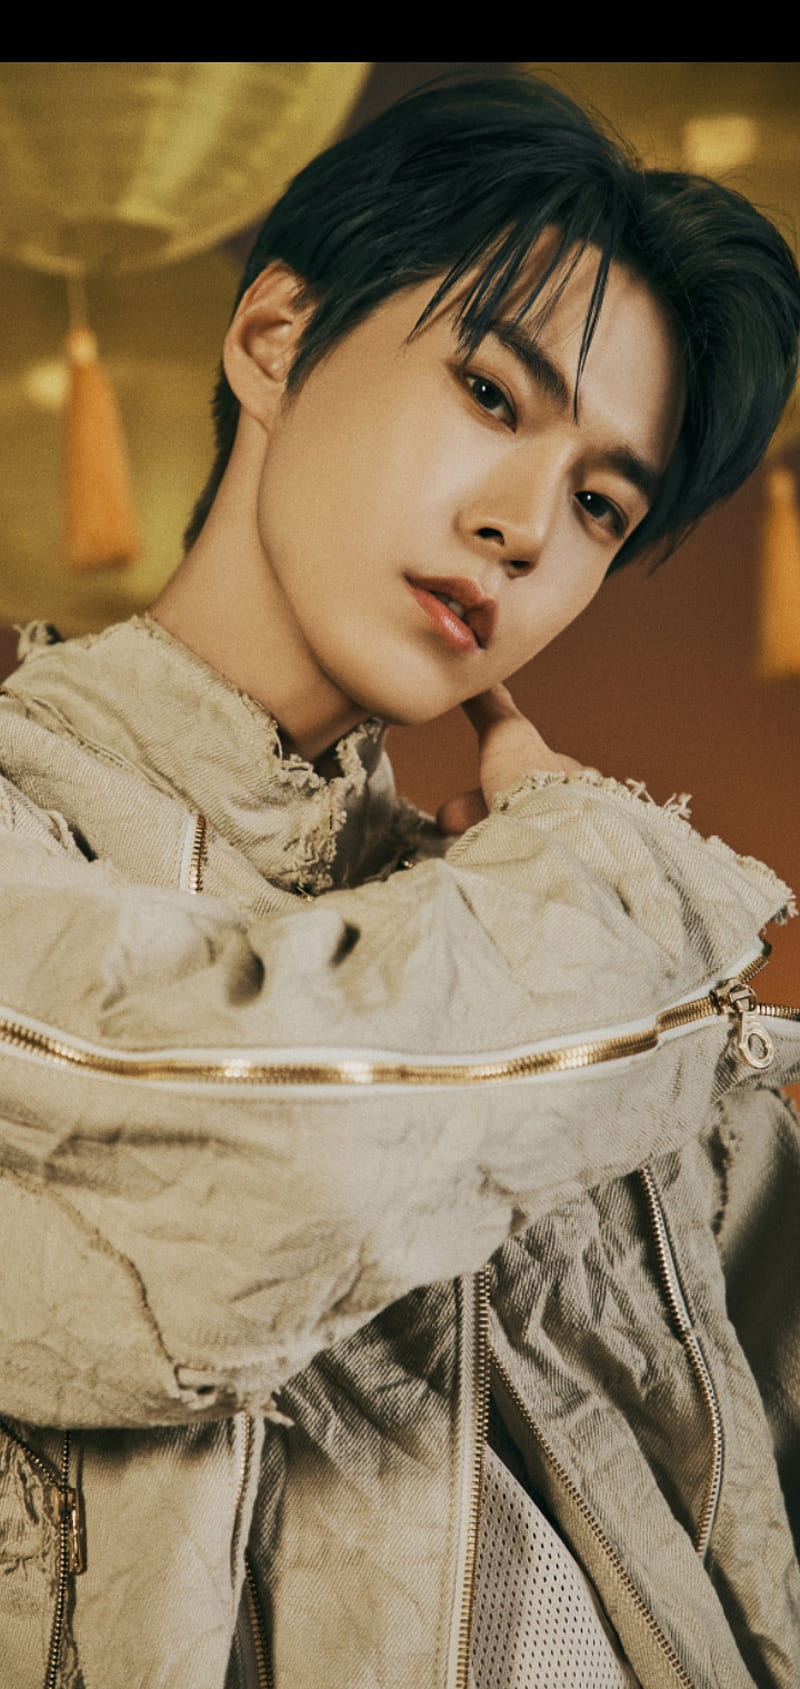 Doyoung, cool, handsome, handsome boy, kim doyoung, kpop, nct, nct2020, resonance, HD phone wallpaper